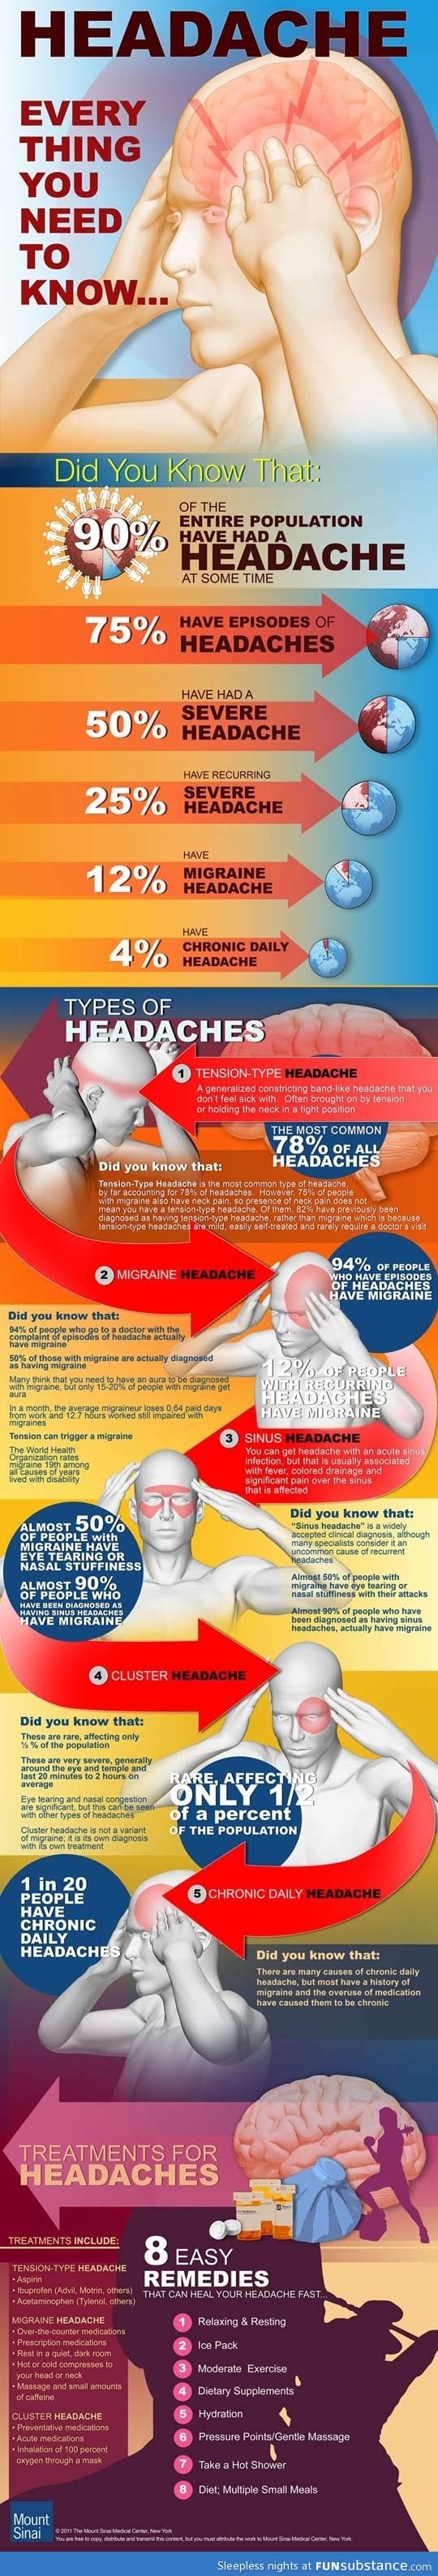 Everything you need to know about headaches